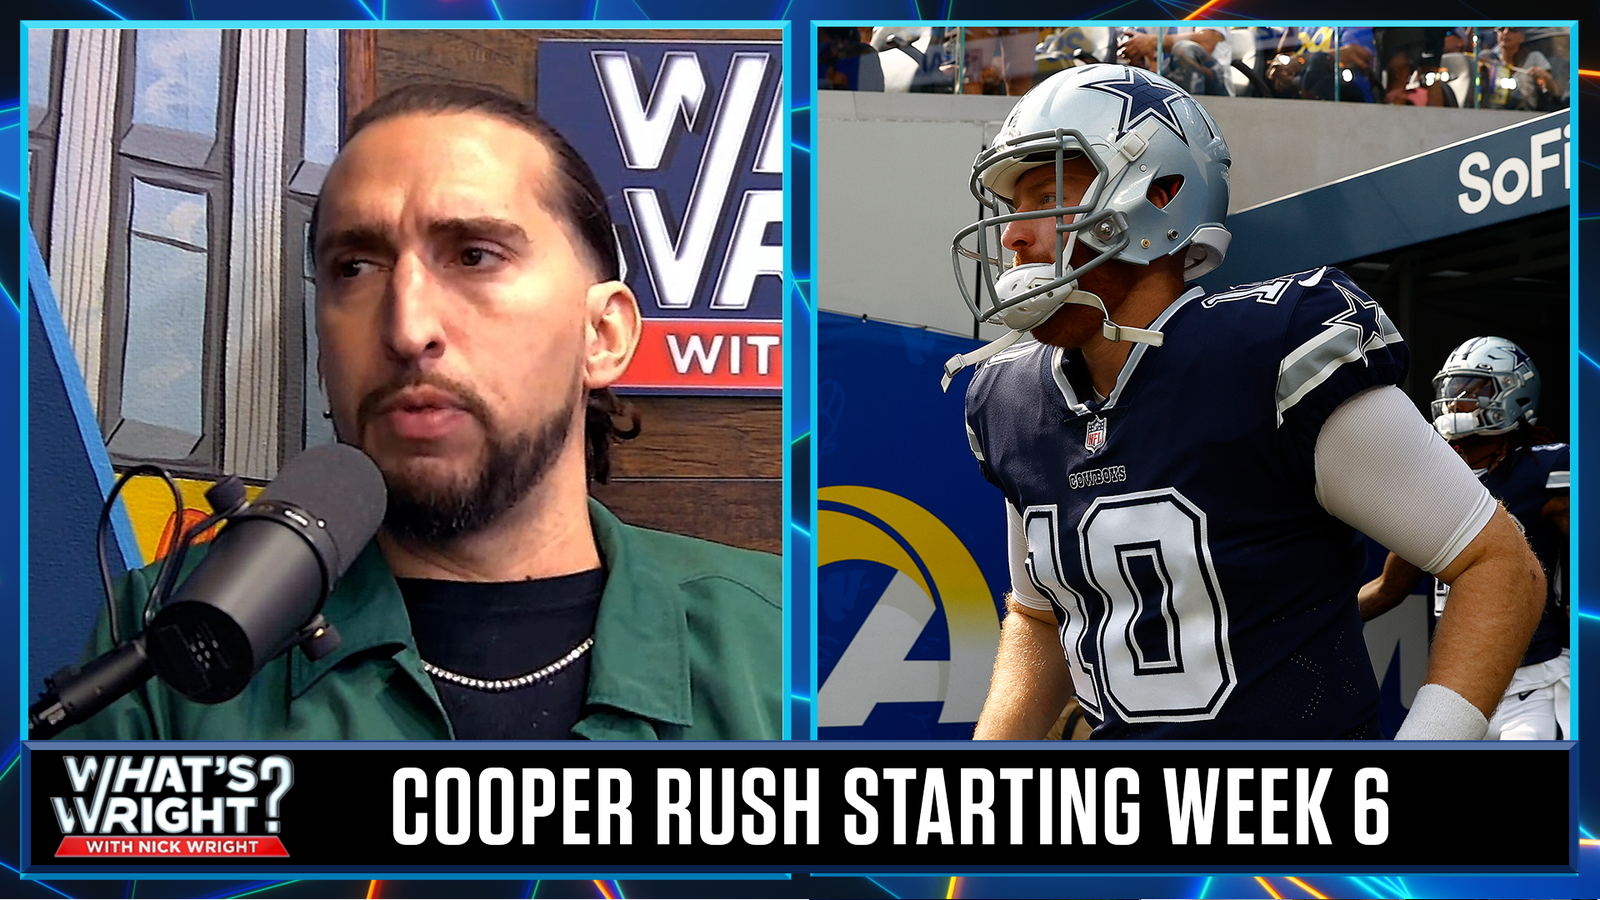 Cooper Rush is back in Wk 6, Nick predicts Eagles will end his winning streak | What's Wright